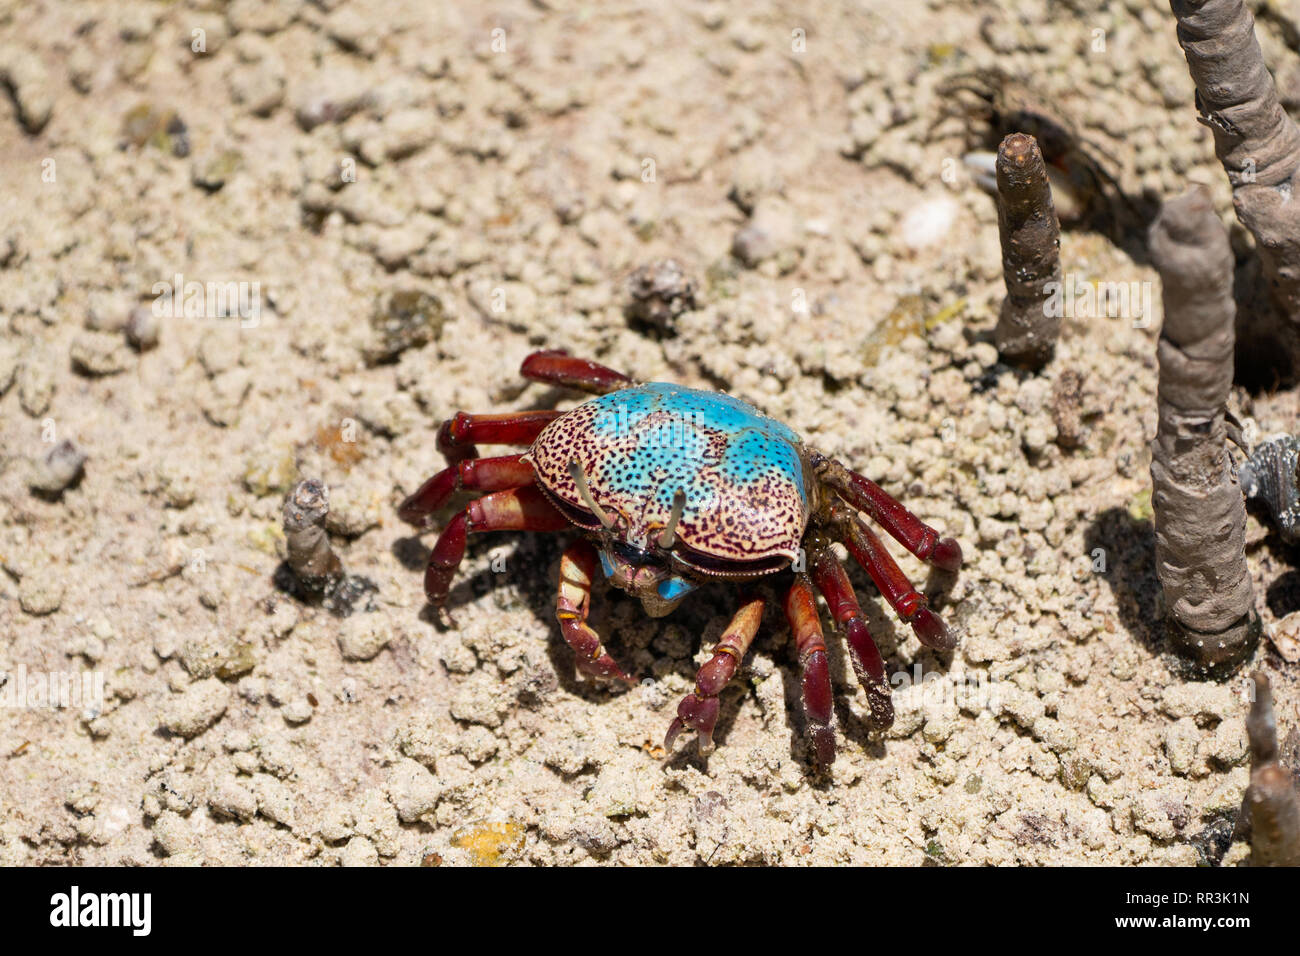 Fiddler crab (Uca tetragonon) without fully grown claws Photographed in a Mangrove swamp, Seychelles Curieuse Island in September Stock Photo